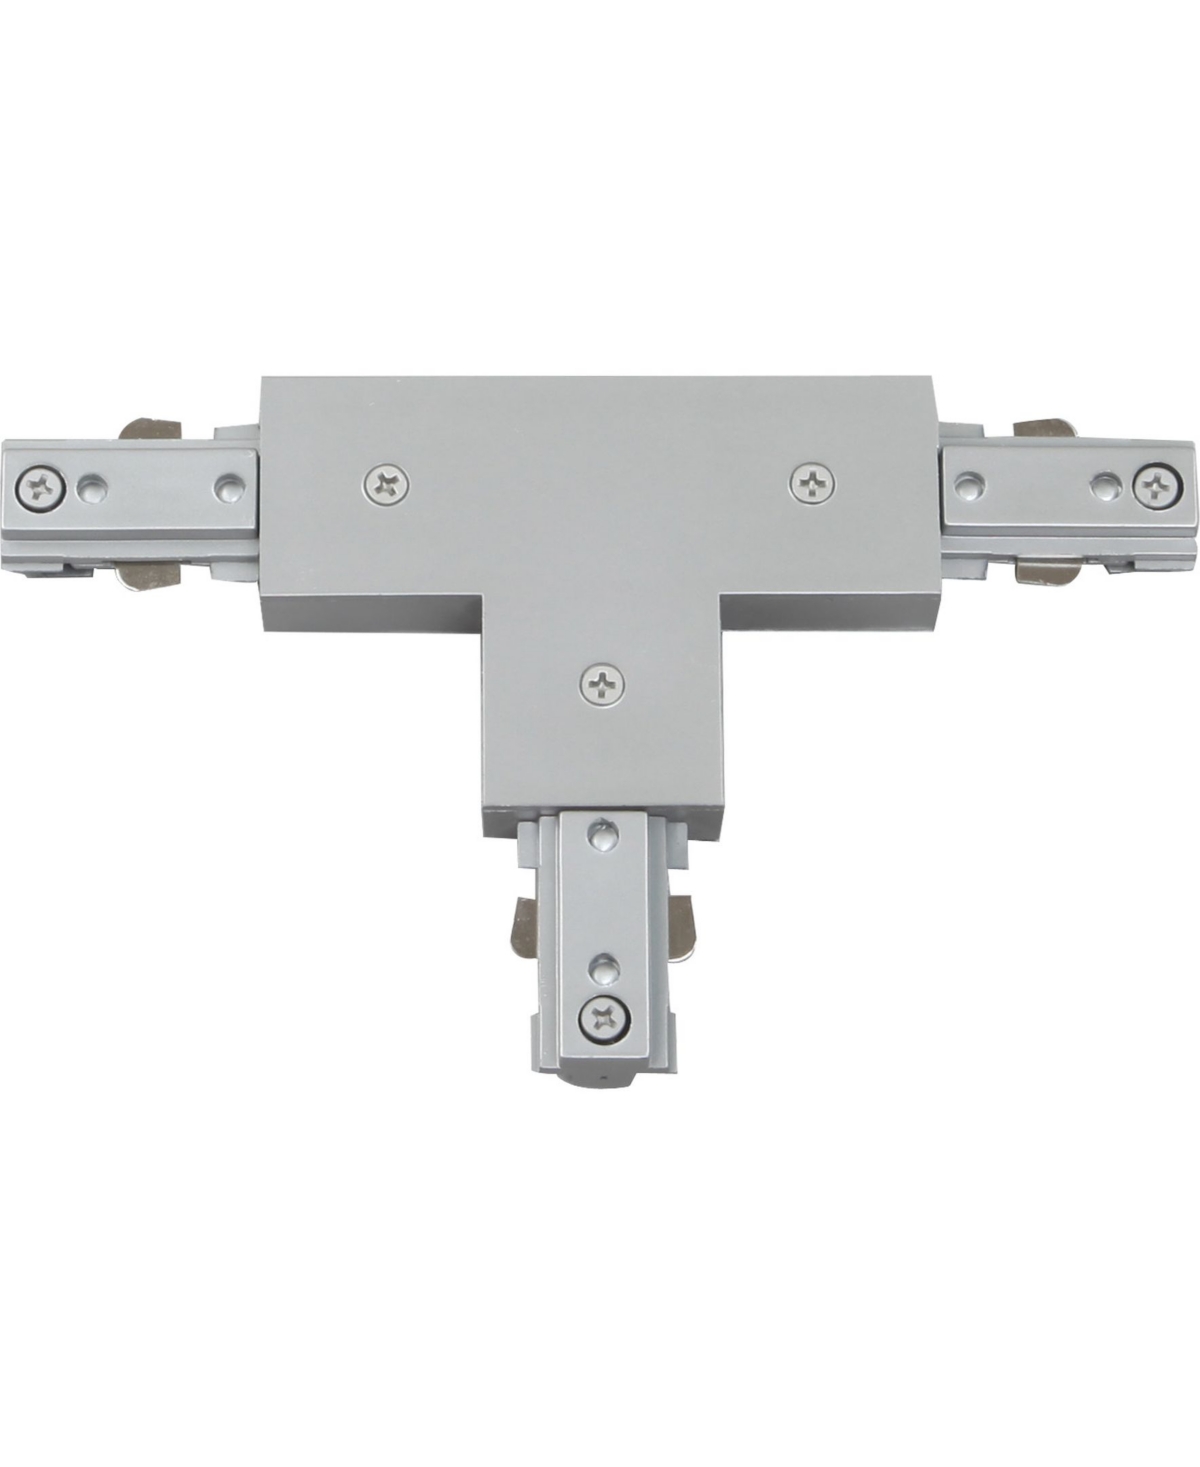 Volume Lighting "t" Connector 120v 1-circuit/1-neutral Track Systems In Gray